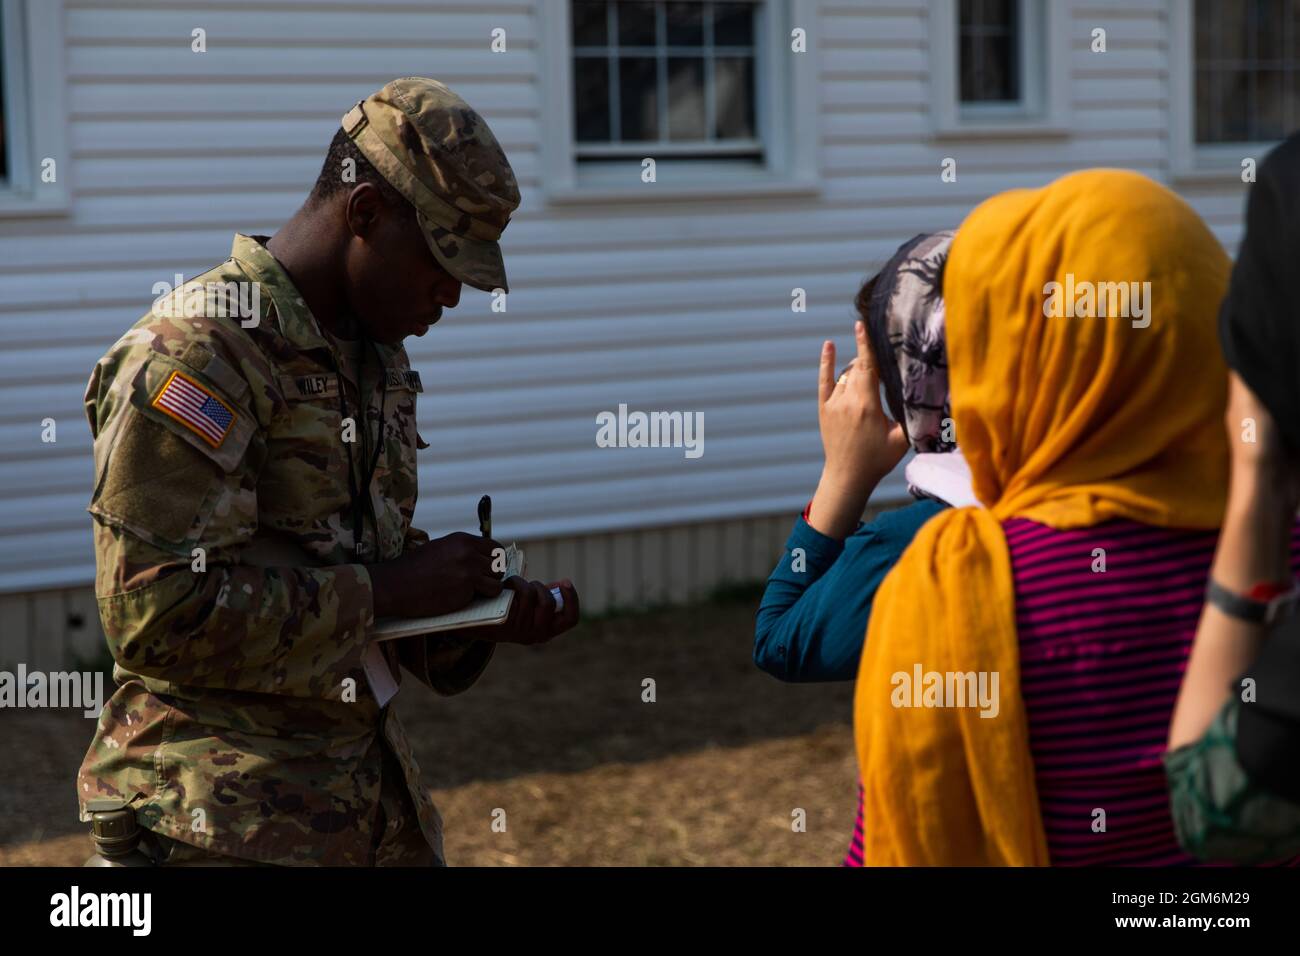 U.S. Army Pfc. Kimani Wiley, a Soldier assigned to 1st Battalion, 506th Infantry Regiment, tallies how many Afghan personnel have received donations during Operation Allies Welcome at Fort Pickett, Virginia, Sep. 12, 2021.  The Department of Defense, through U.S. Northern Command, and in support of the Department of Homeland Security, is providing transportation, temporary housing, medical screening, and general support for at least 50,000 Afghan evacuees at suitable facilities, in permanent or temporary structures, as quickly as possible. This initiative provides Afghan personnel essential su Stock Photo